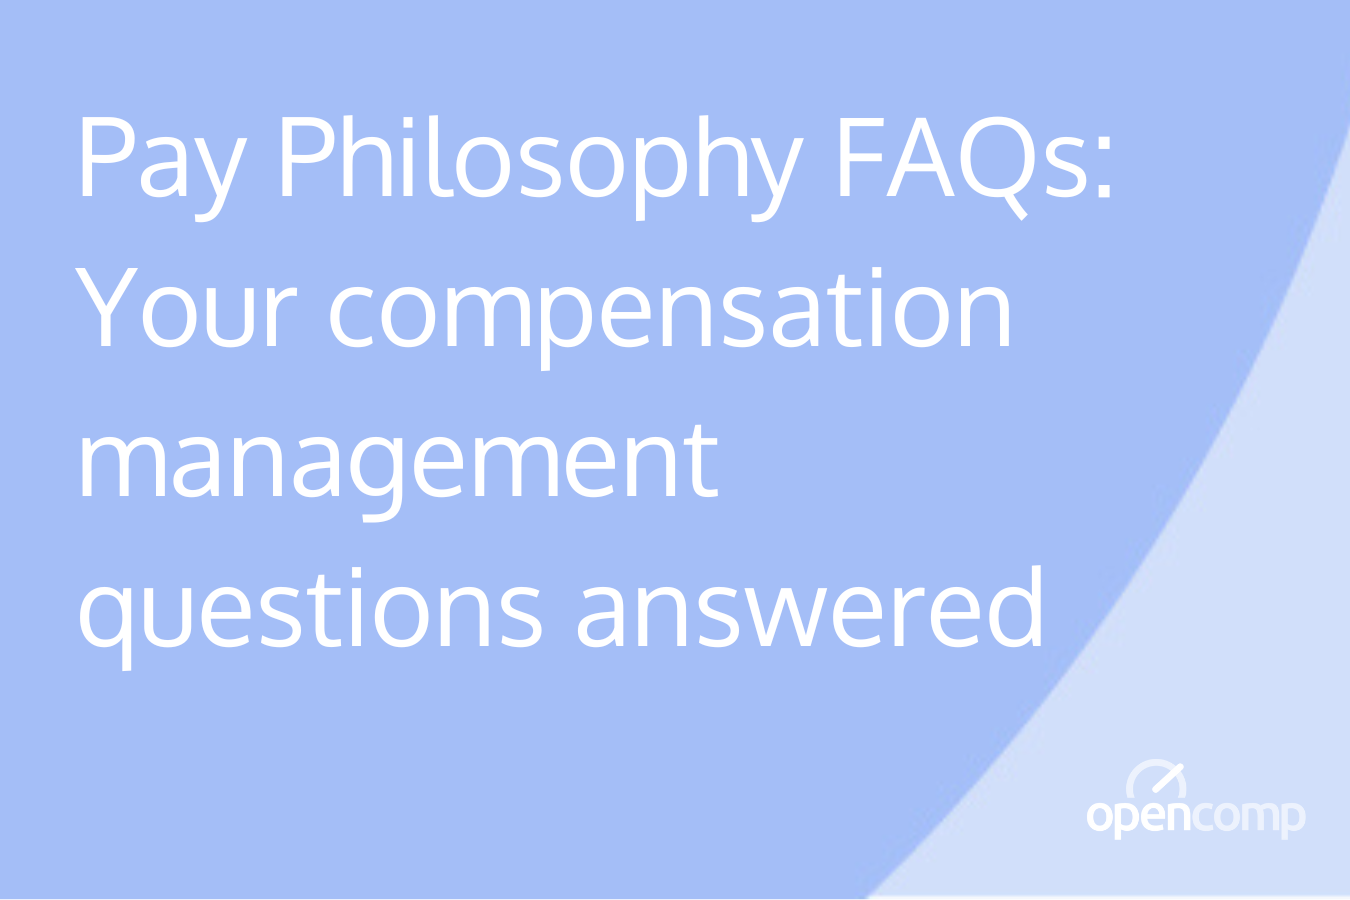 Pay Philosophy FAQs Your compensation management questions answered